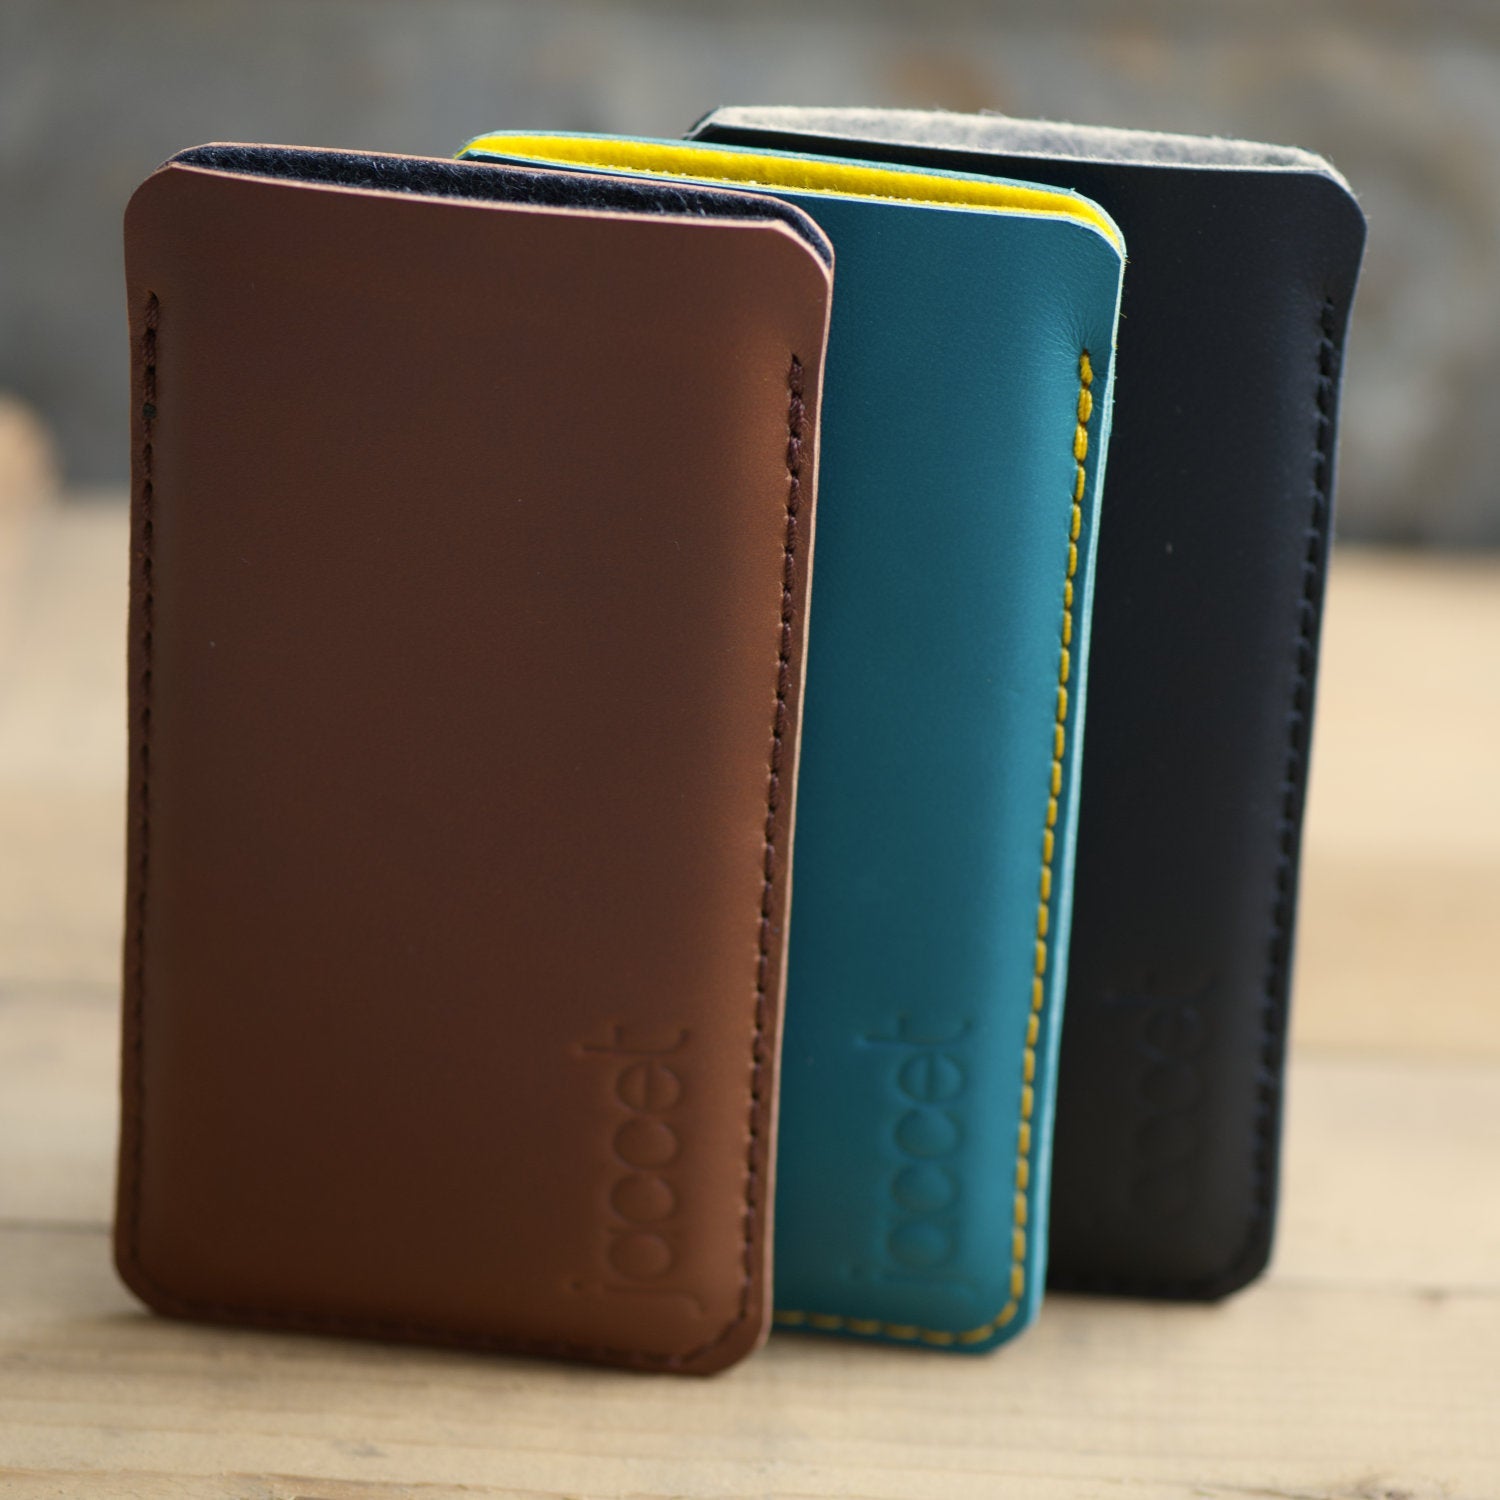 Full-grain leather Sony Xperia sleeve - Brown leather with black wolvilt - 100% handmade